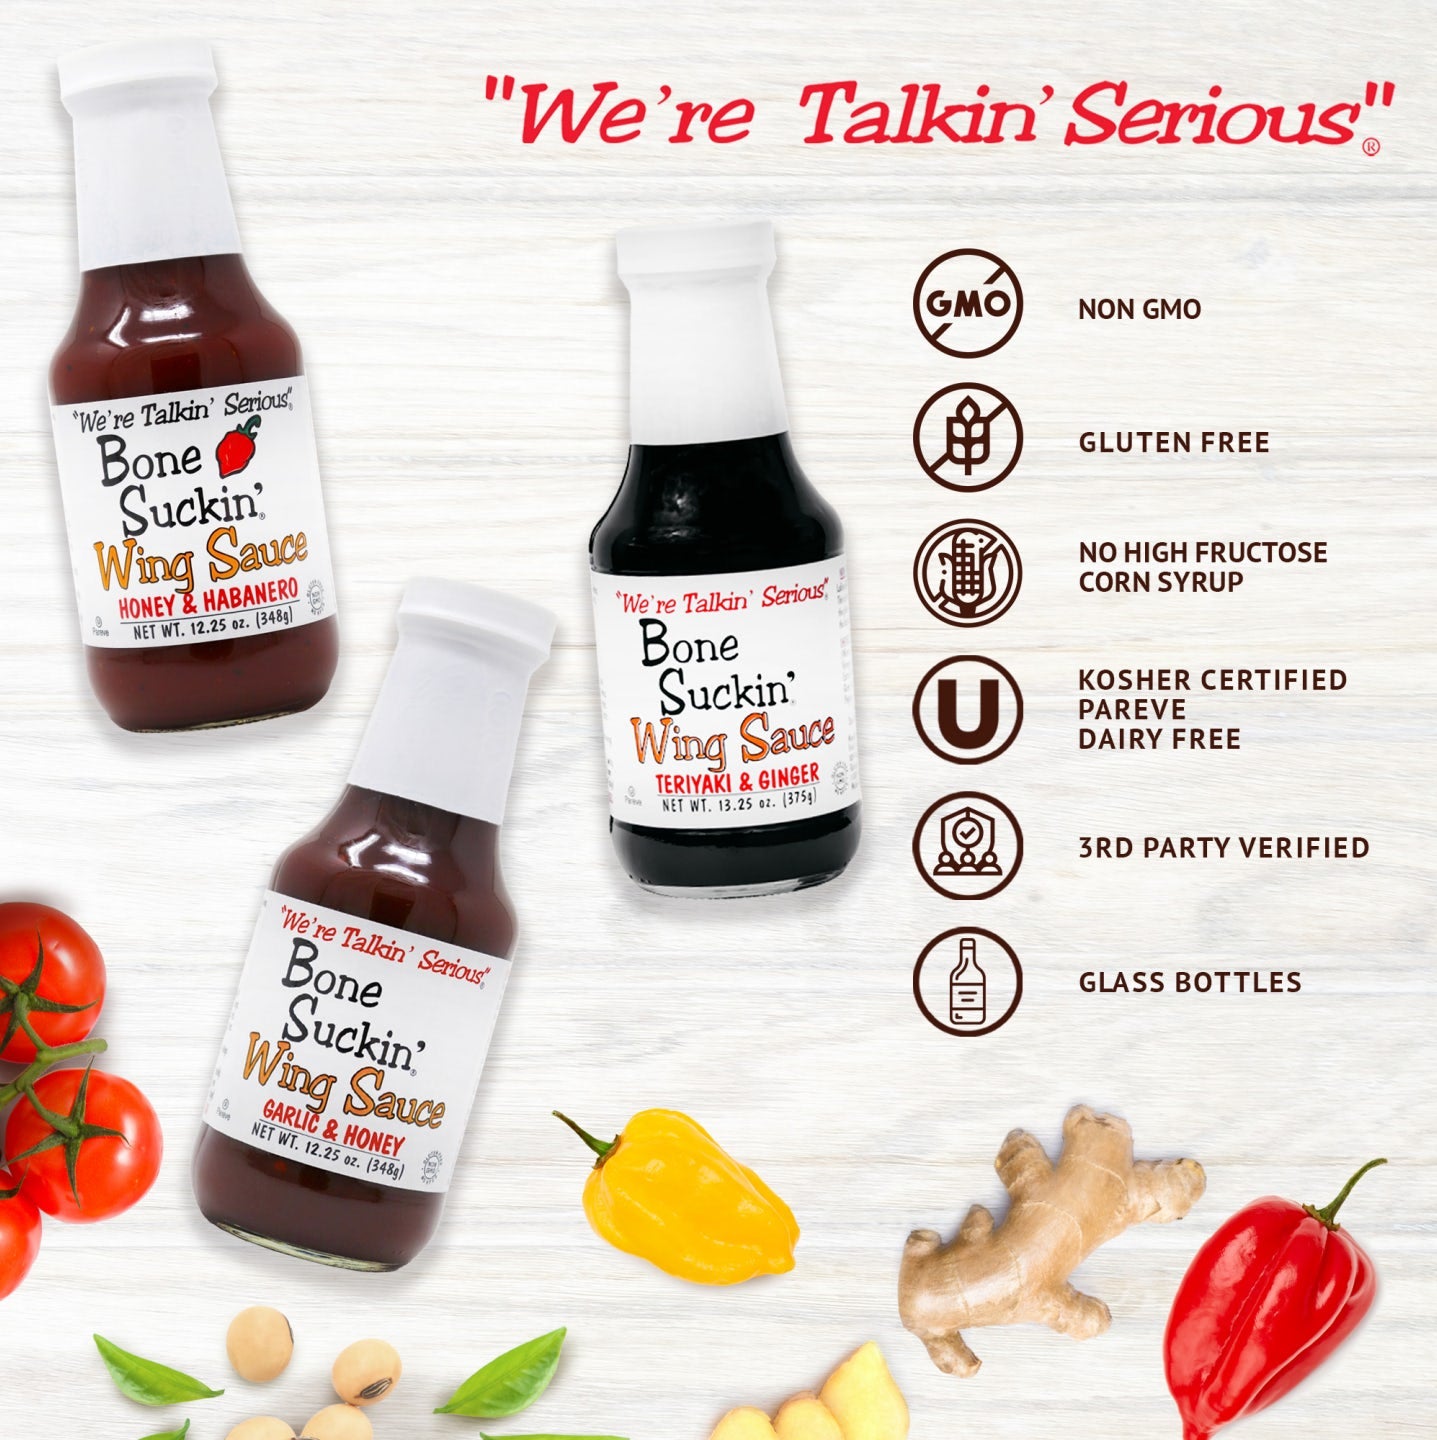 Bone Suckin' Wing Sauces are Non GMO, Gluten free, no high fructose corn syrup, kosher certified, pareve dairy free, 3rd party verified, and glass bottled.